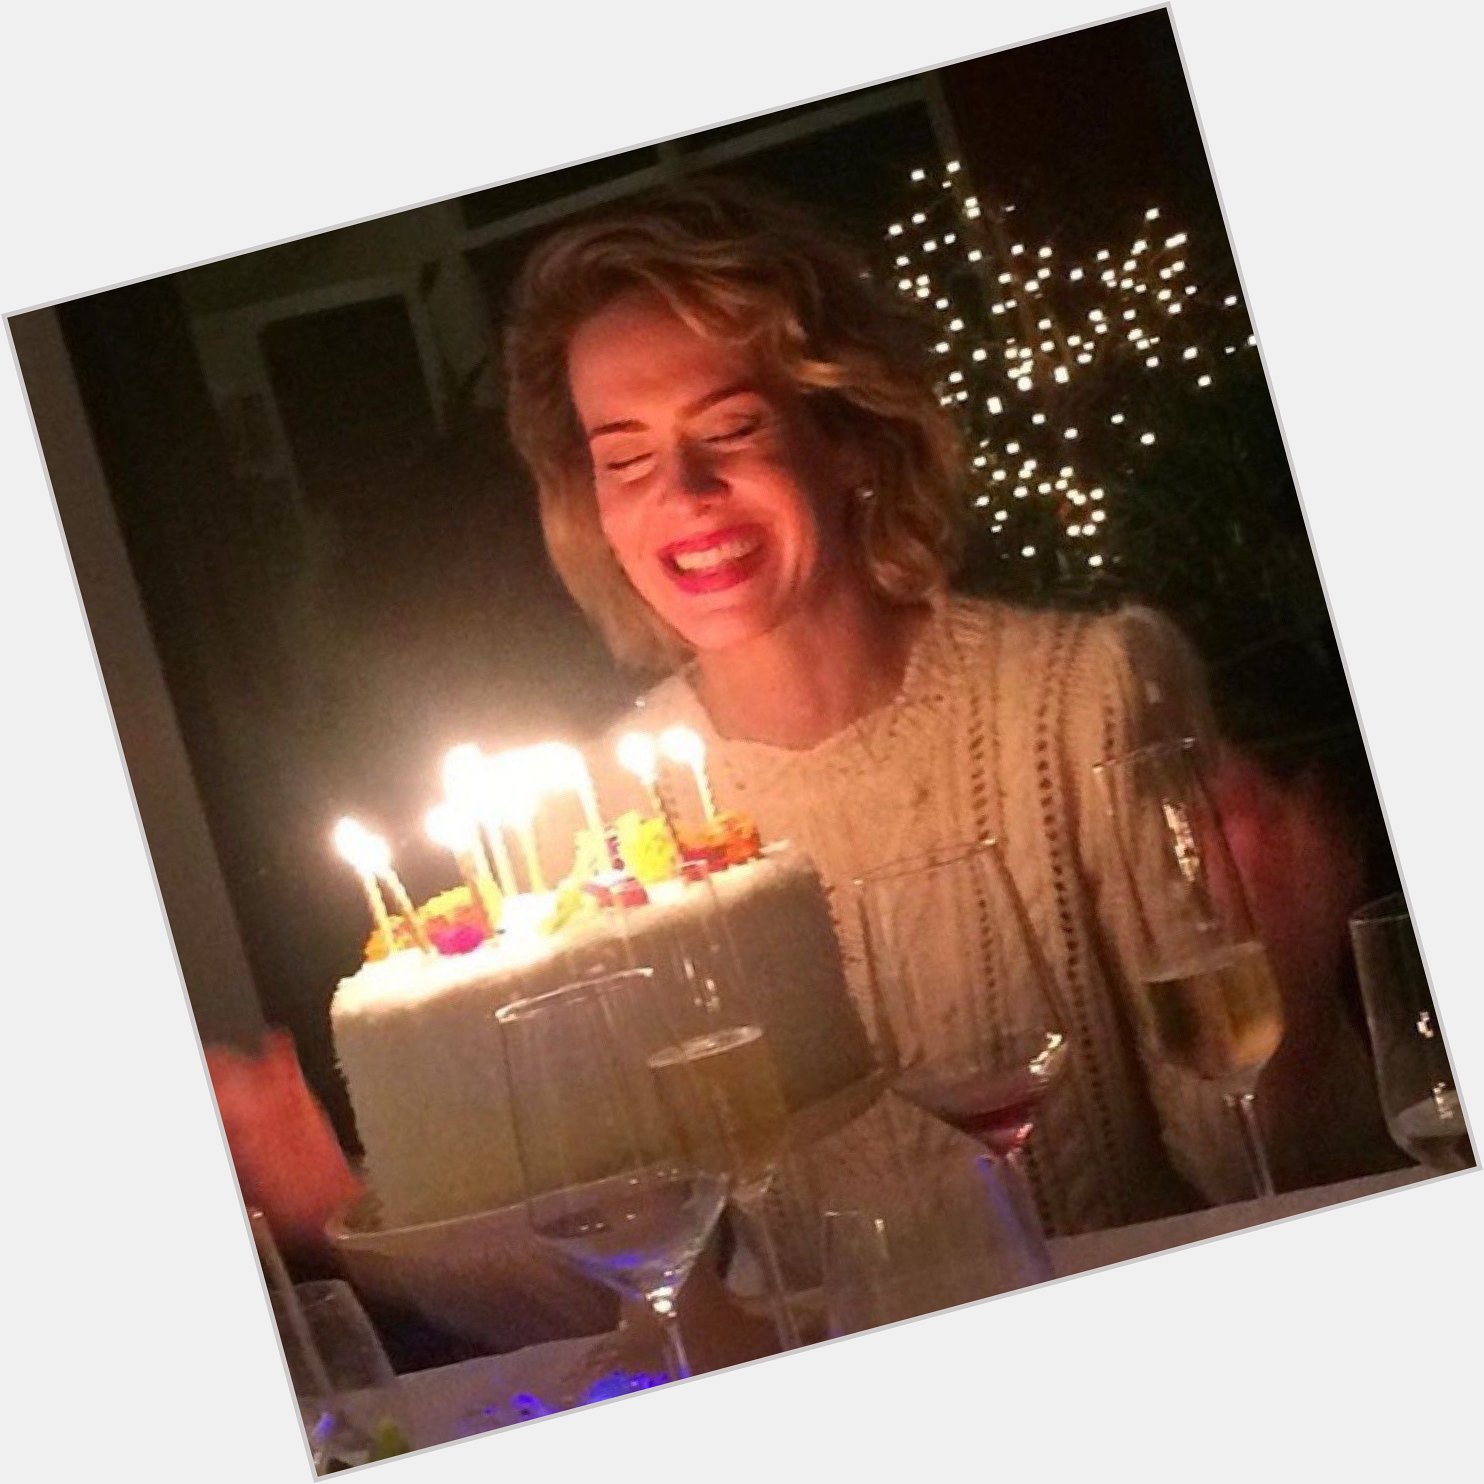 Happy birthday to our queen sarah paulson! hope you have the best day. we all love u so much <3 